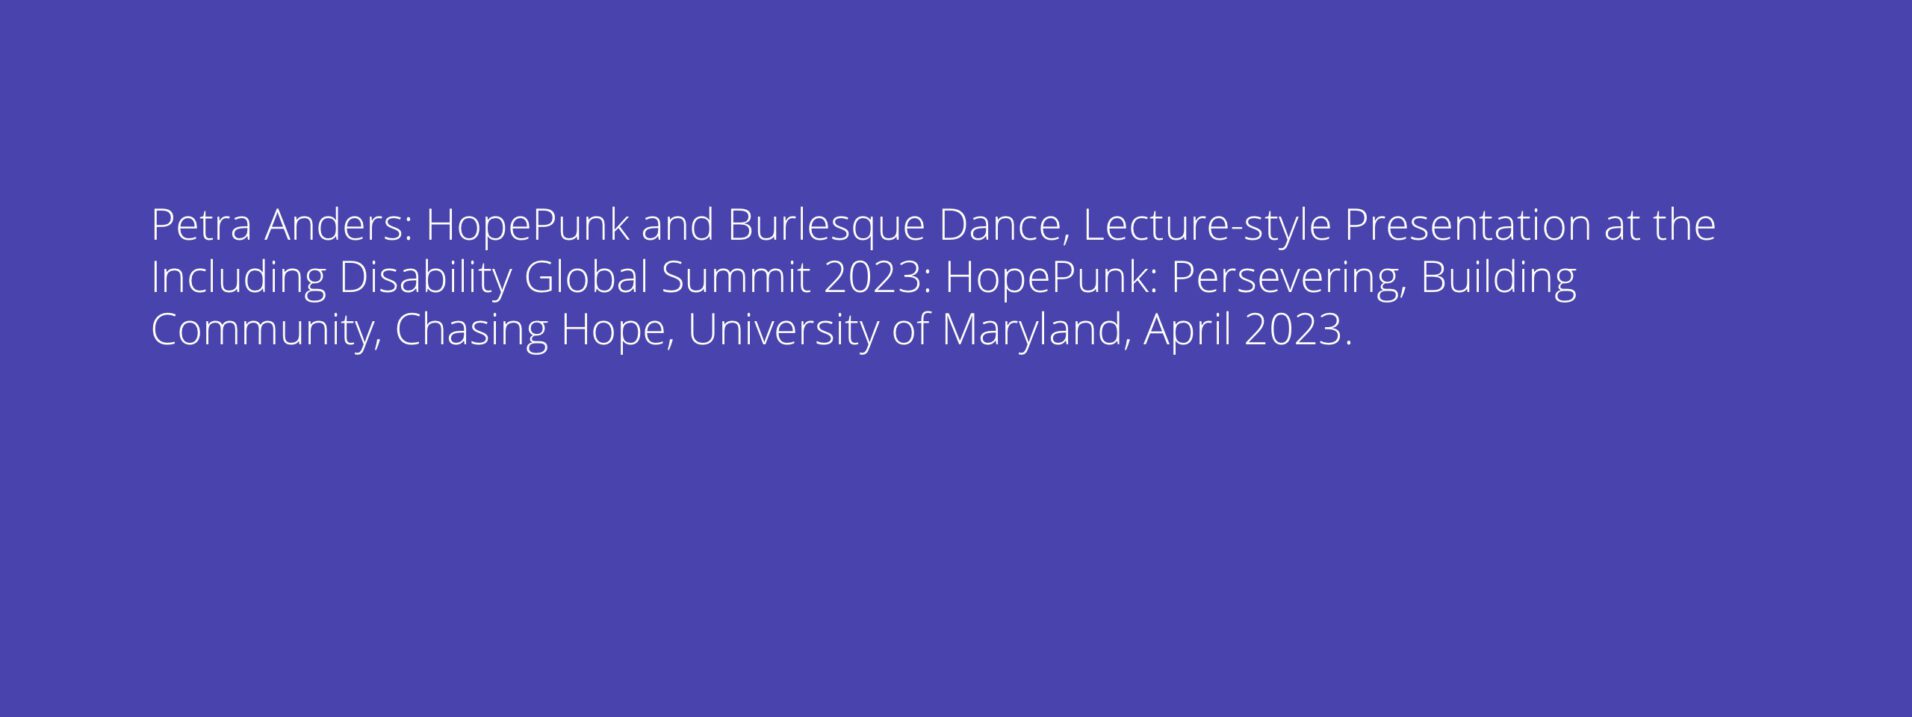 Petra Anders: HopePunk and Burlesque Dance, Lecture-style Presentation at the Including Disability Global Summit 2023: HopePunk: Persevering, Building Community, Chasing Hope, University of Maryland, April 2023.